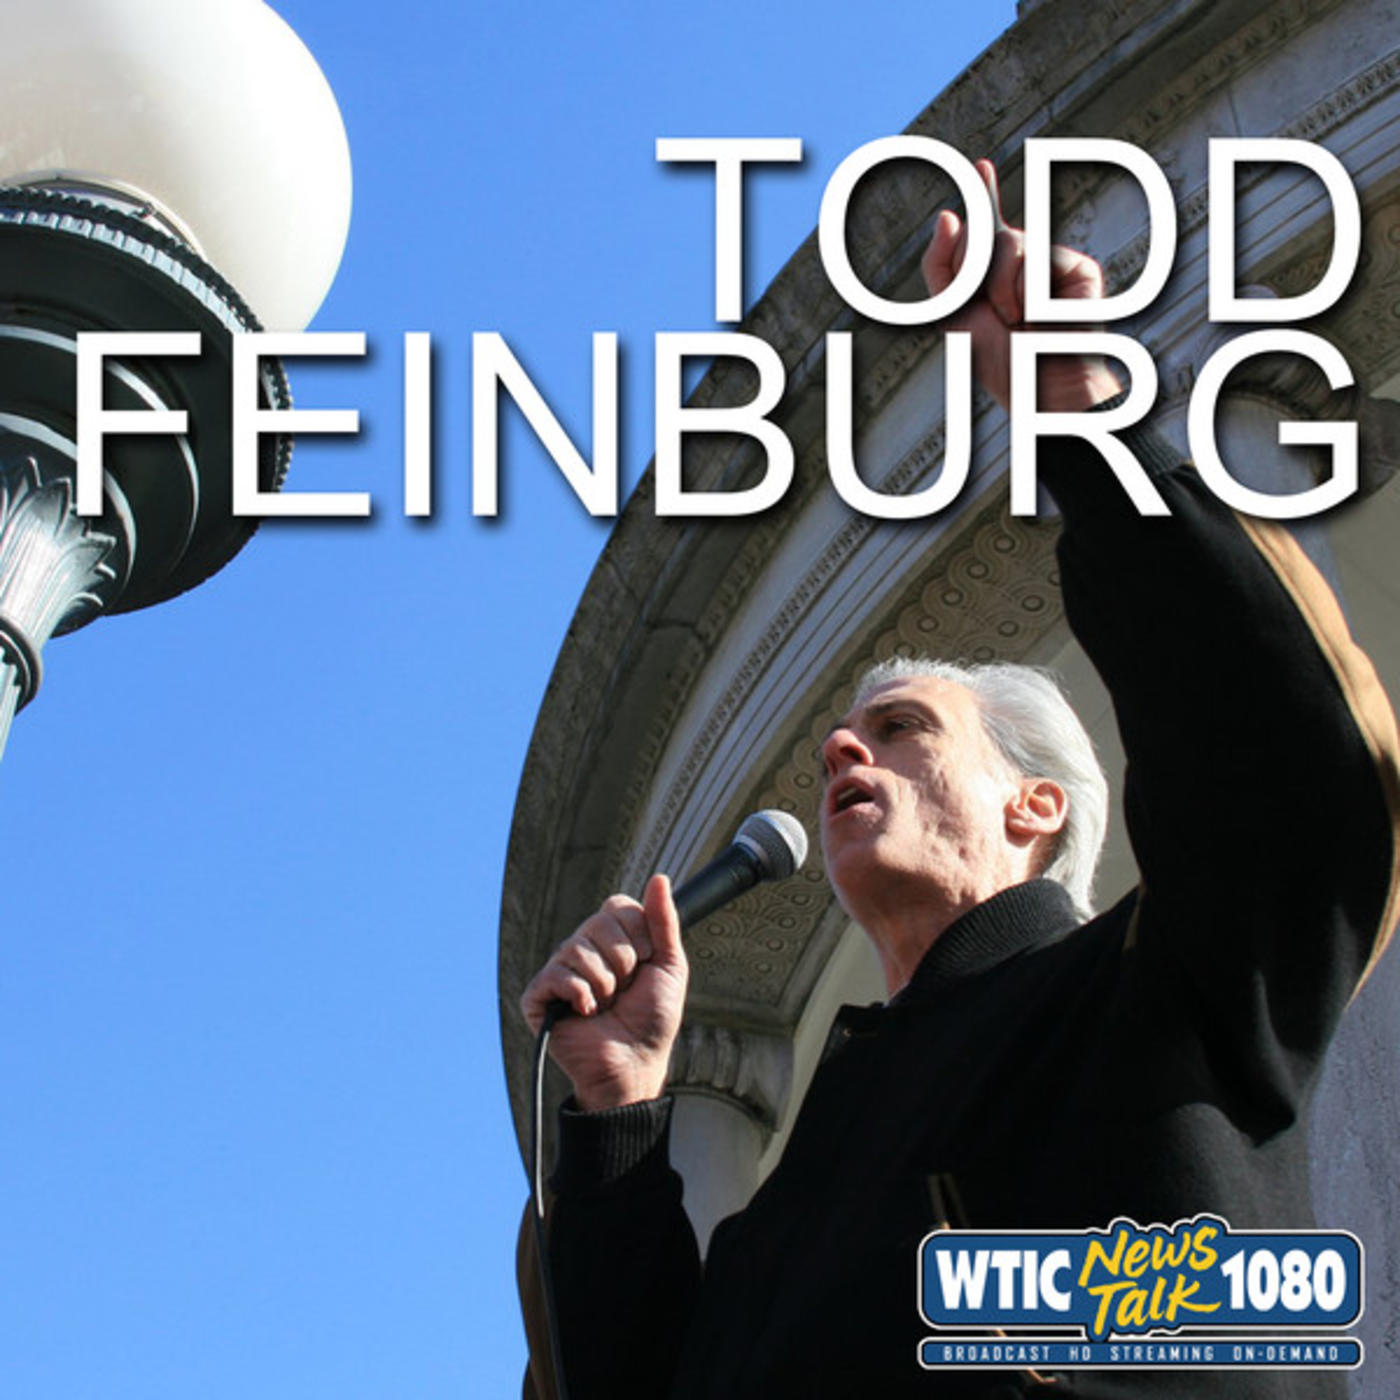 Todd Feinburg: Our Friends in Labor with Chris Powell (05/06/20)